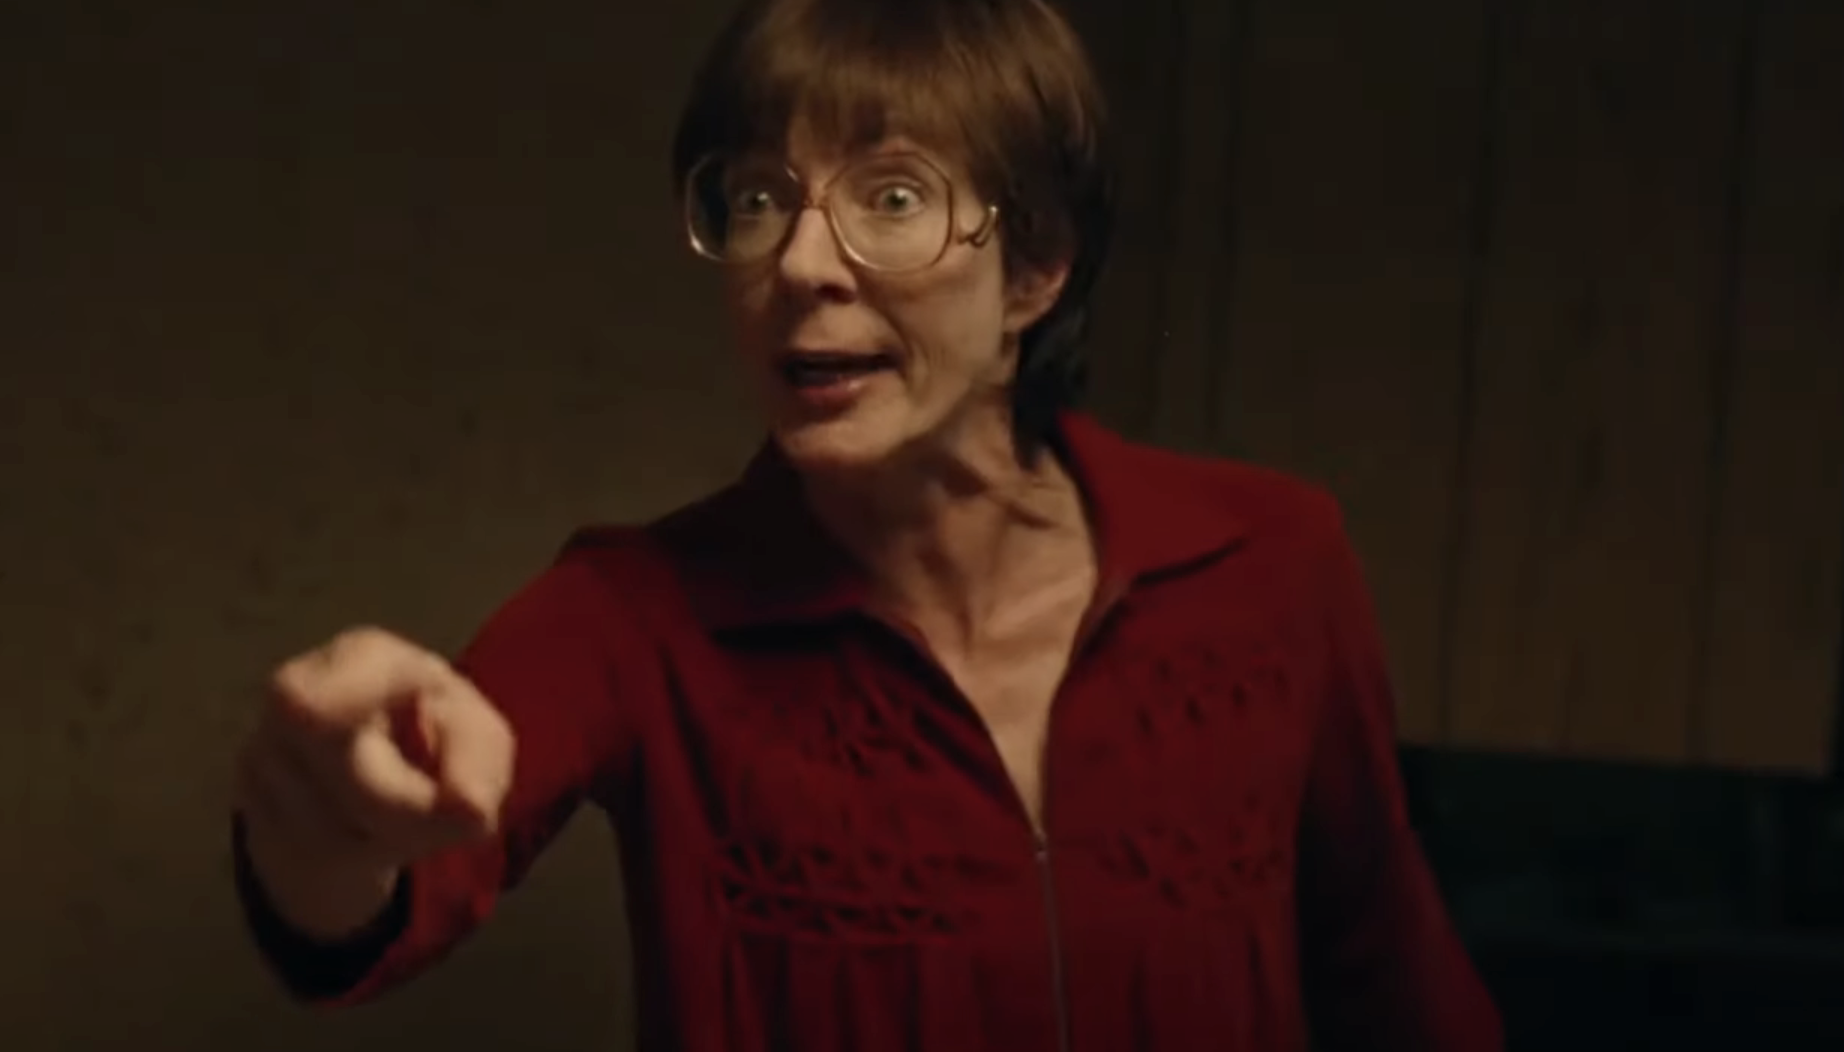 Woman in red blouse with glasses pointing, surprised expression